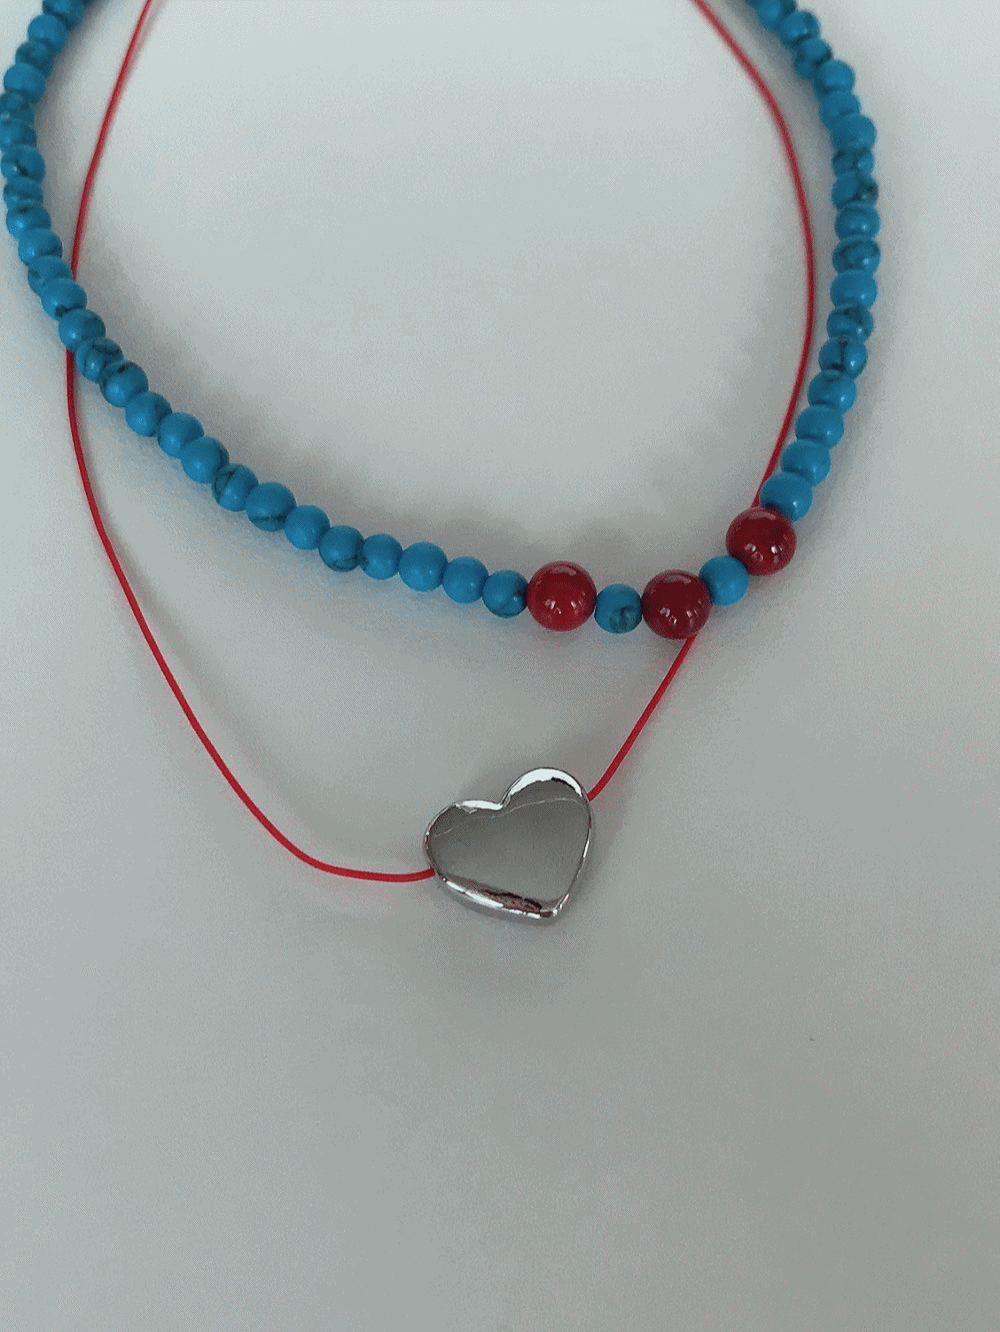 [Acc] Kiwi Turquoise Necklace / one color